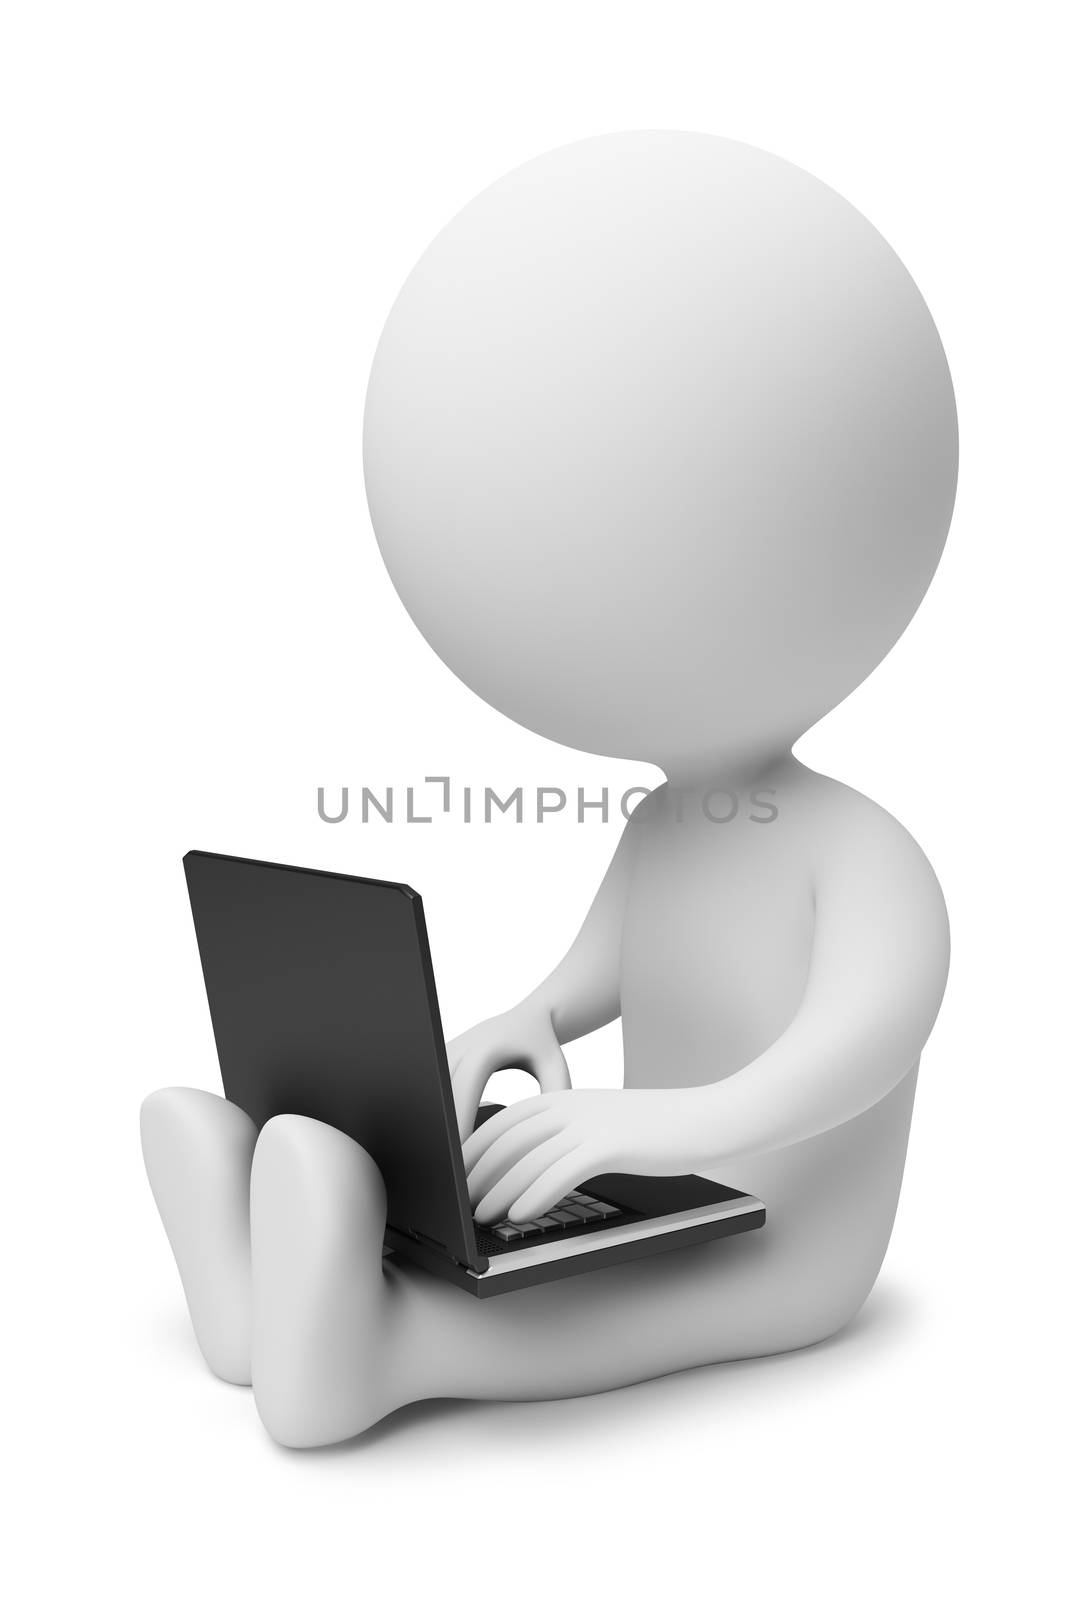 3d small people working on the laptop. 3d image. Isolated white background.